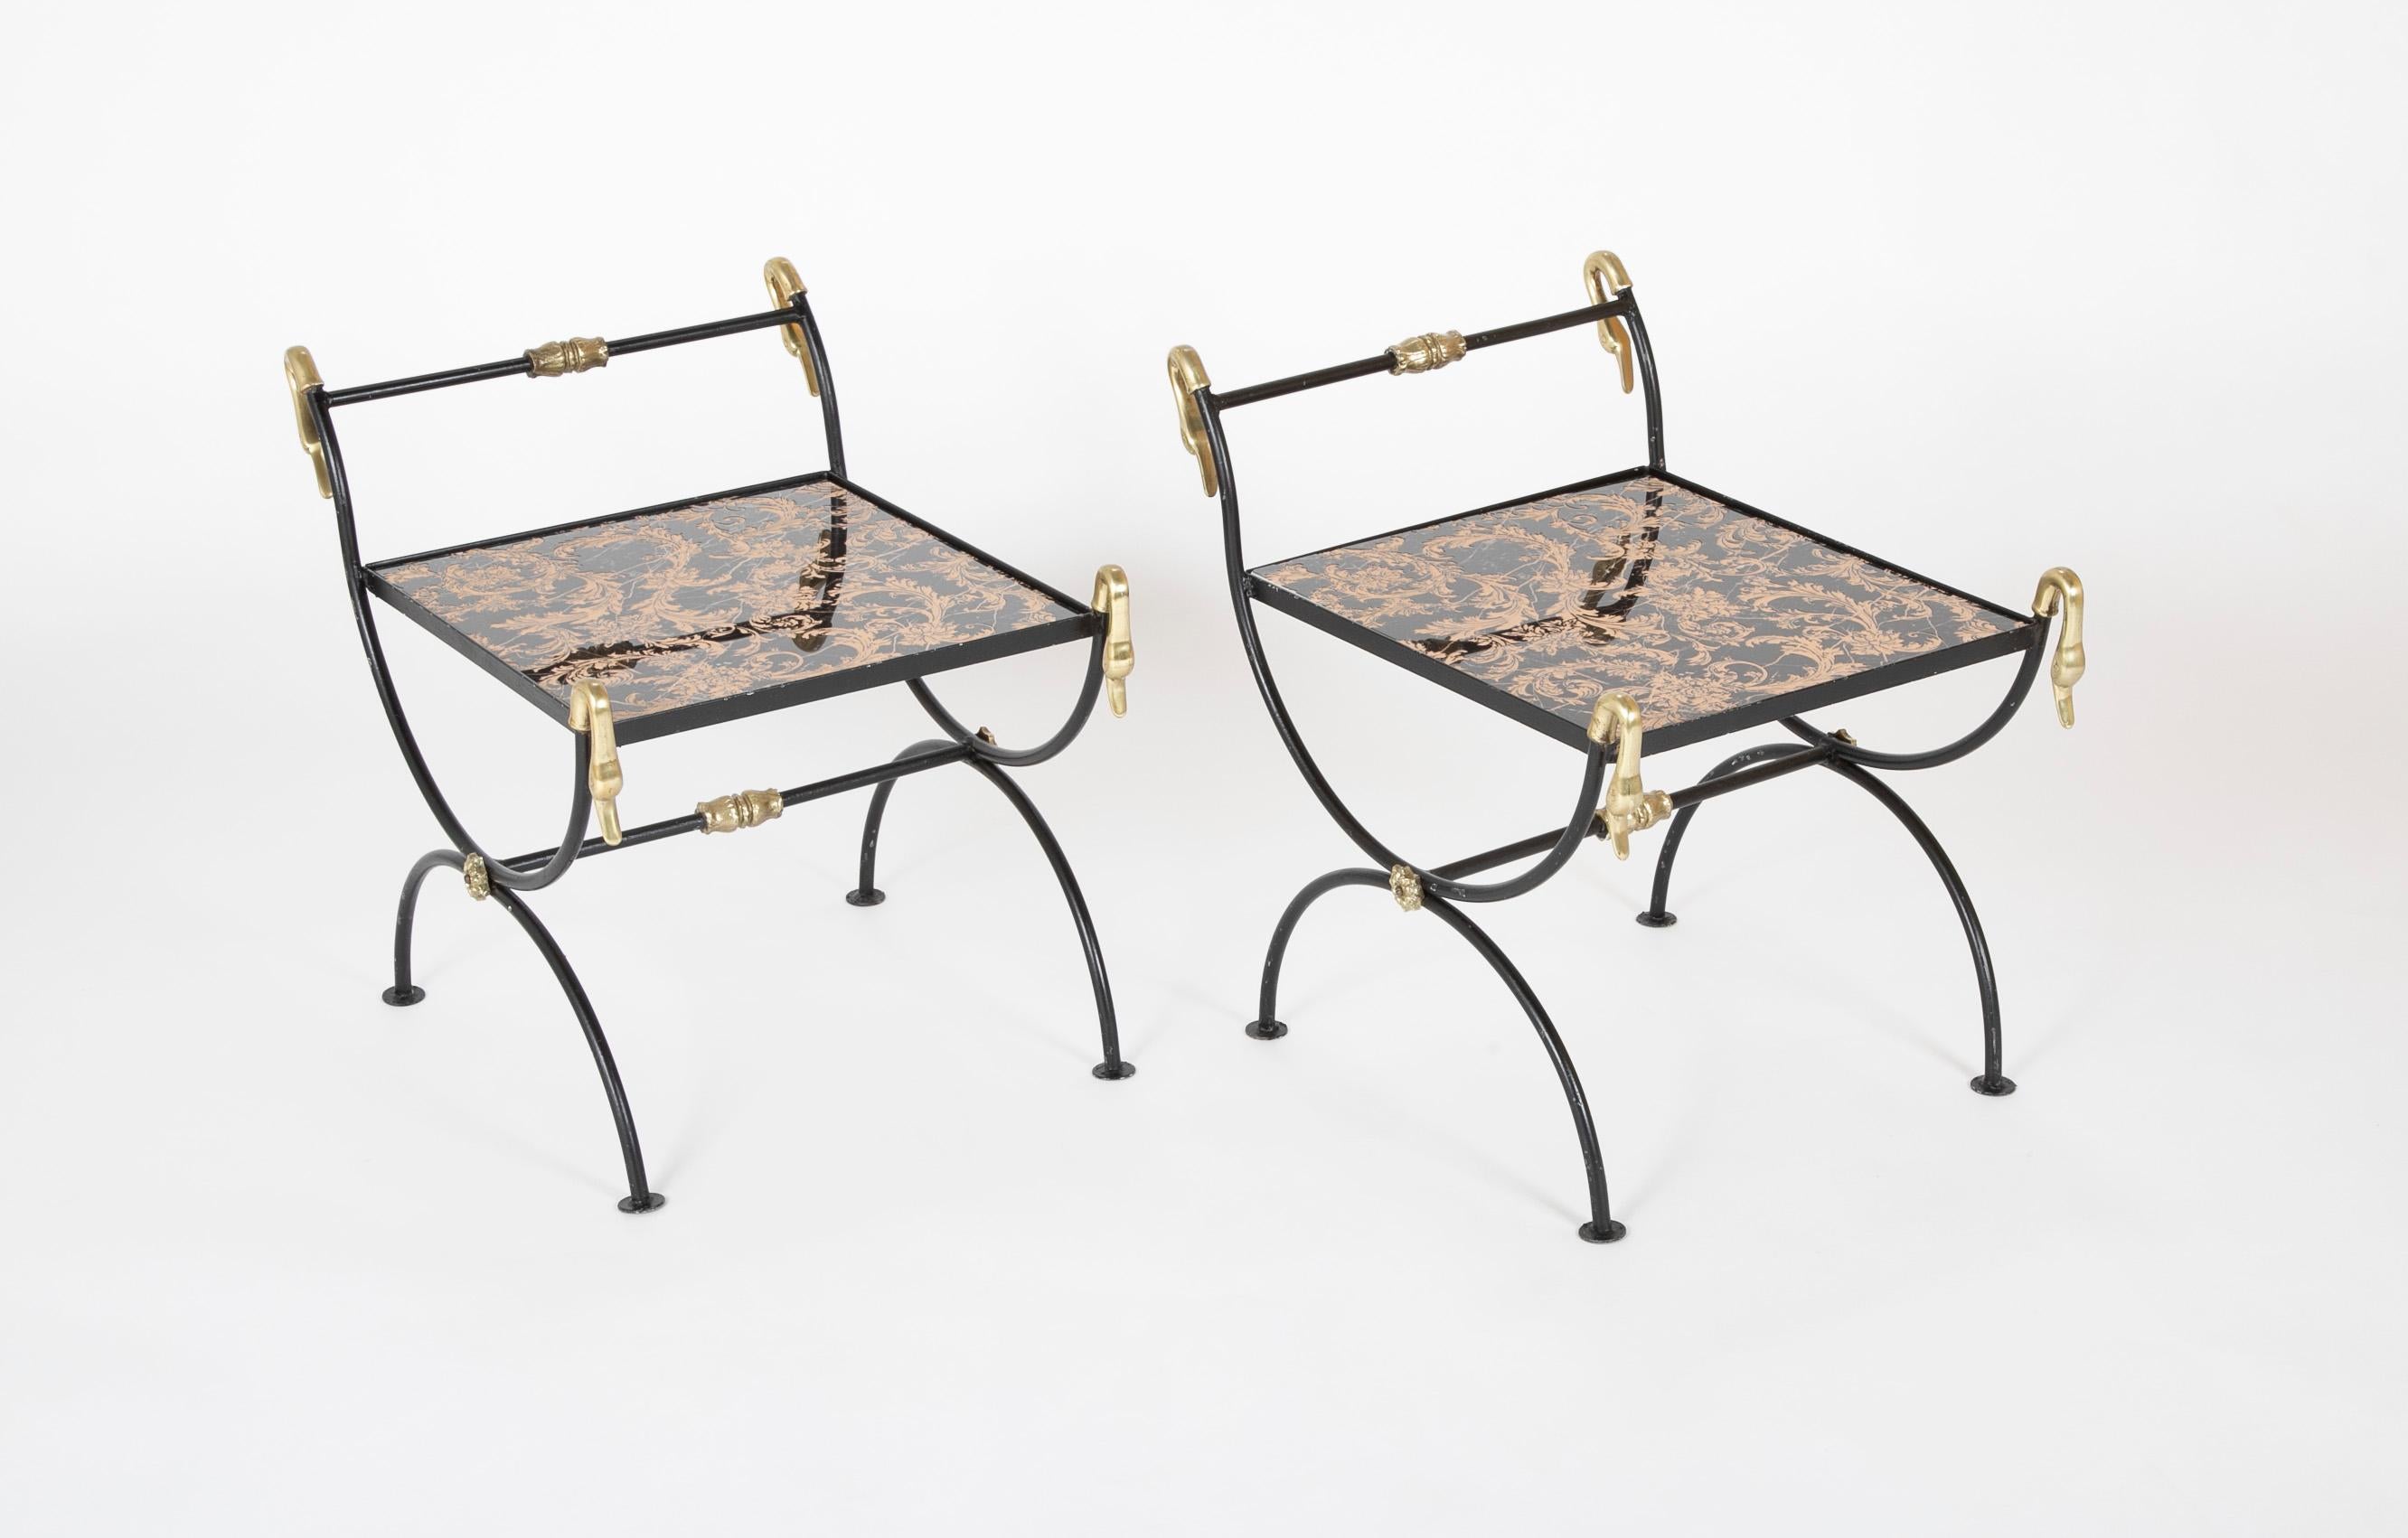 Neoclassical Three Piece Iron and Brass Coffee Table with Versace Insets